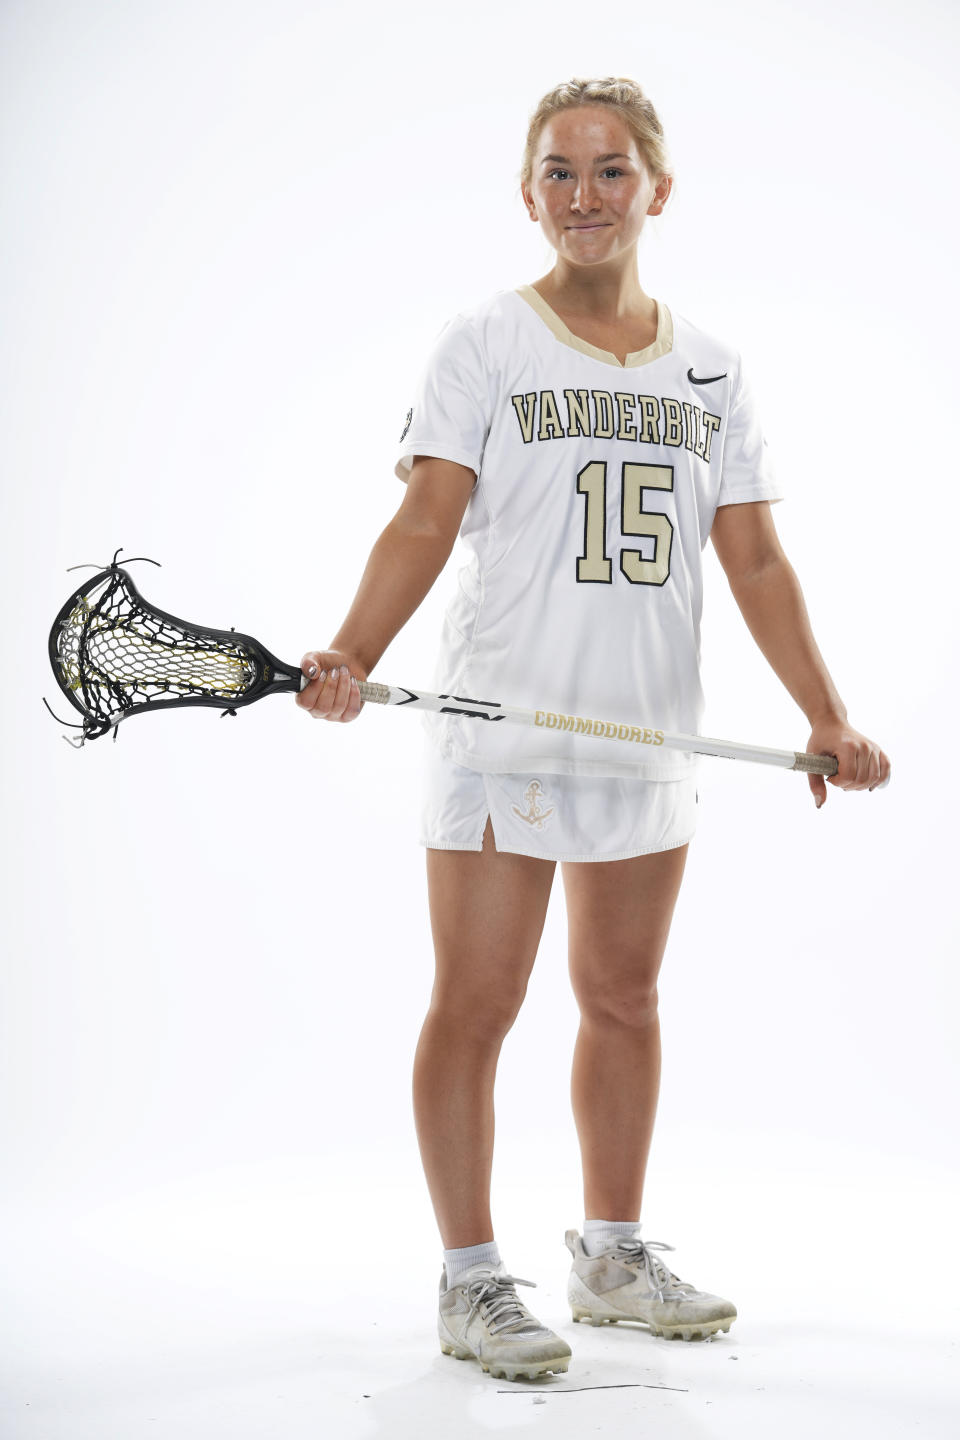 Vanderbilt lacrosse player Cailin Bracken poses for a photograph Dec. 3, 2021, in Nashville, Tenn. When she became overwhelmed by college life, especially when she had to isolate upon testing positive for COVID-19 after just a few days on campus, she decided to leave the team. Bracken wrote an open letter to college sports, calling on coaches and administrators to become more cognizant of the challenges athletes face in navigating not only their competitive side, but also their social and academic responsibilities. (Vanderbilt University via AP)